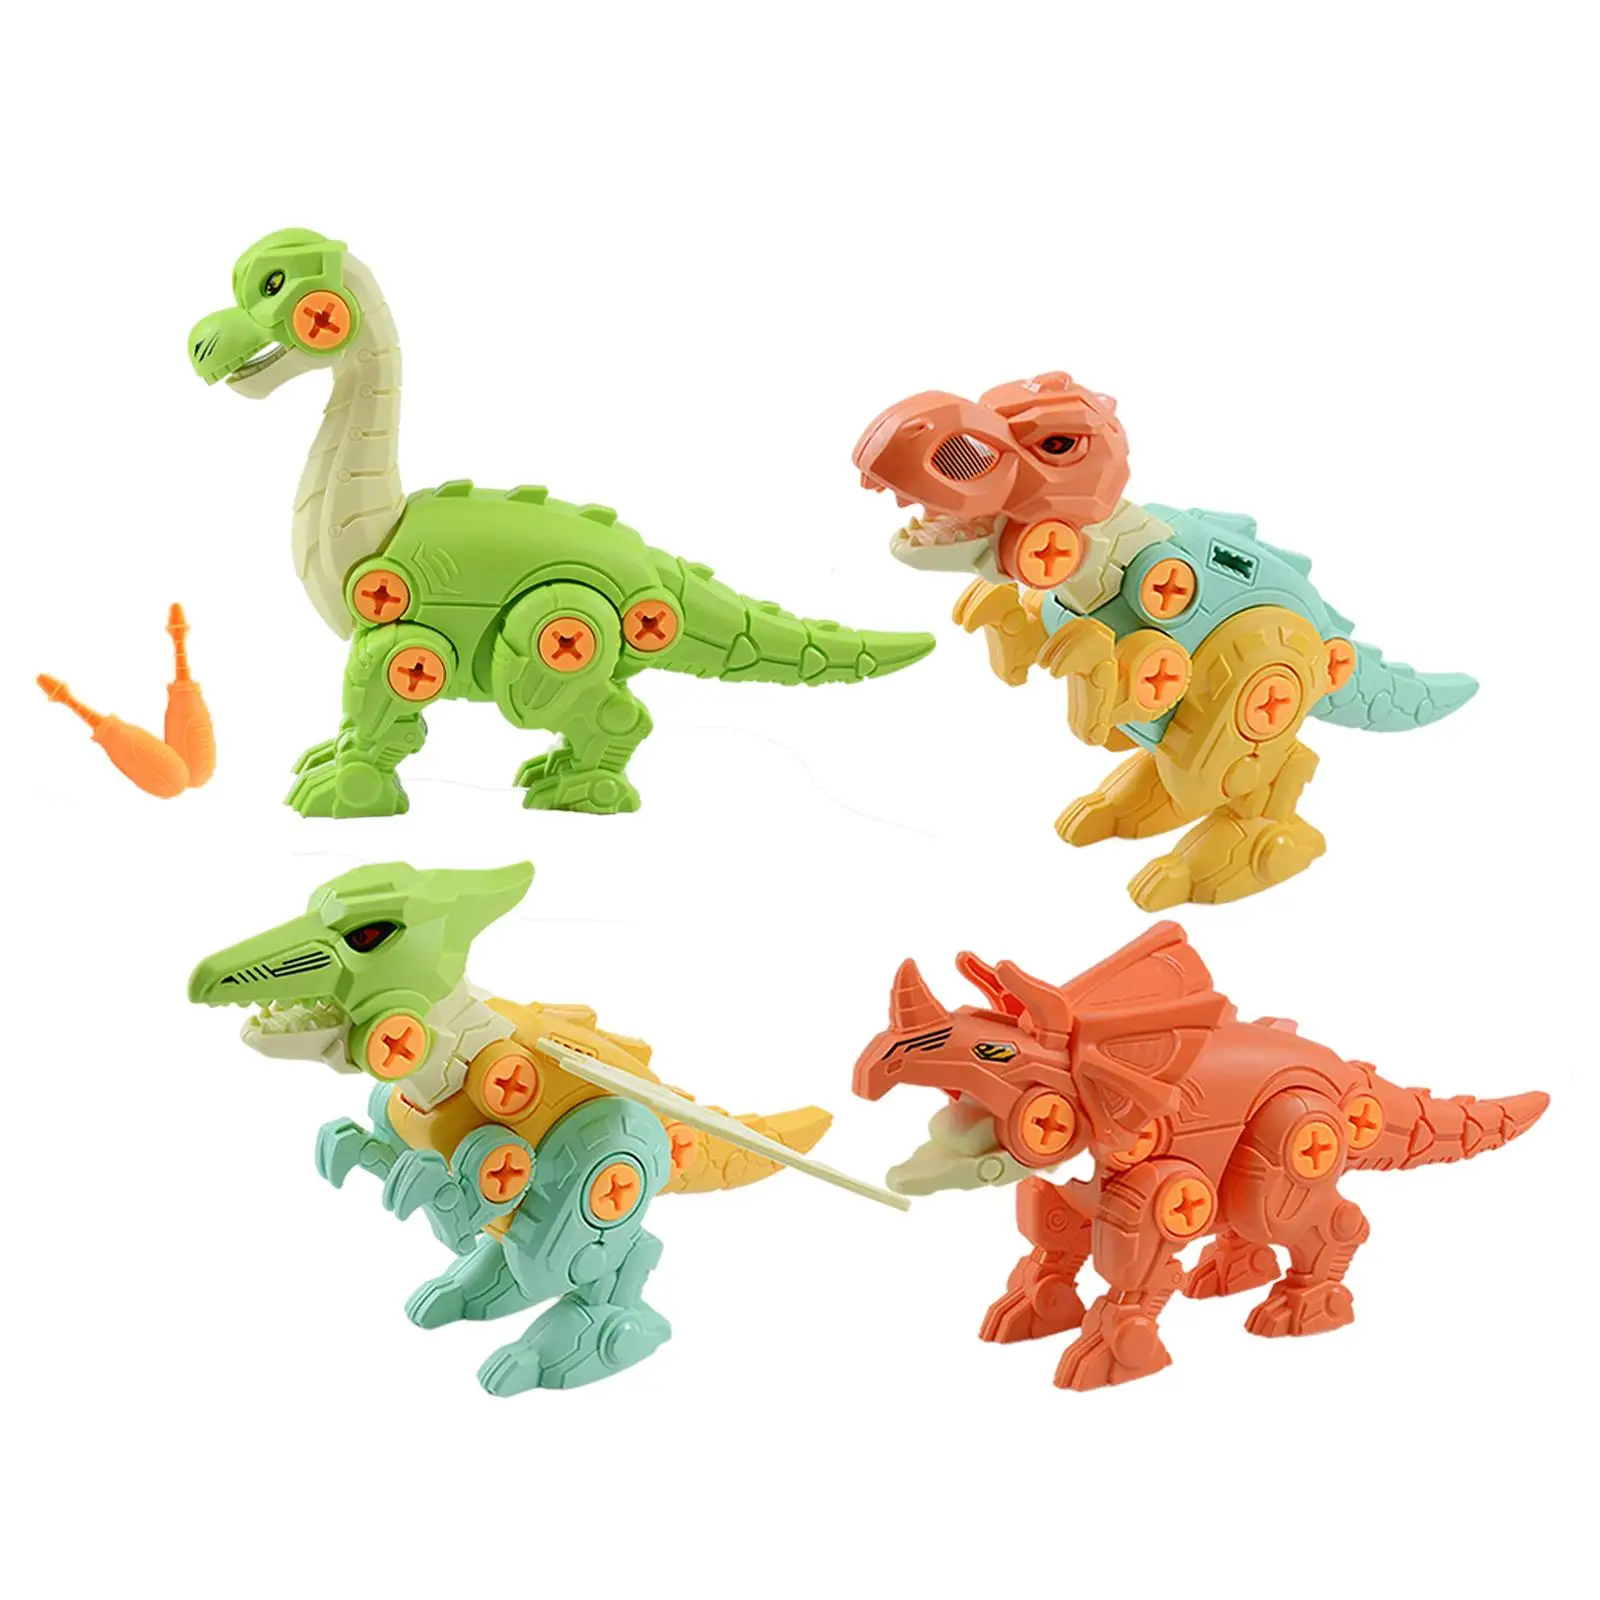 4x DIY Assembly Dinosaur Toys Kit with Flexible Joints Birthday Gifts Learning Toy Construction Toy for Kids Girls Children Boys